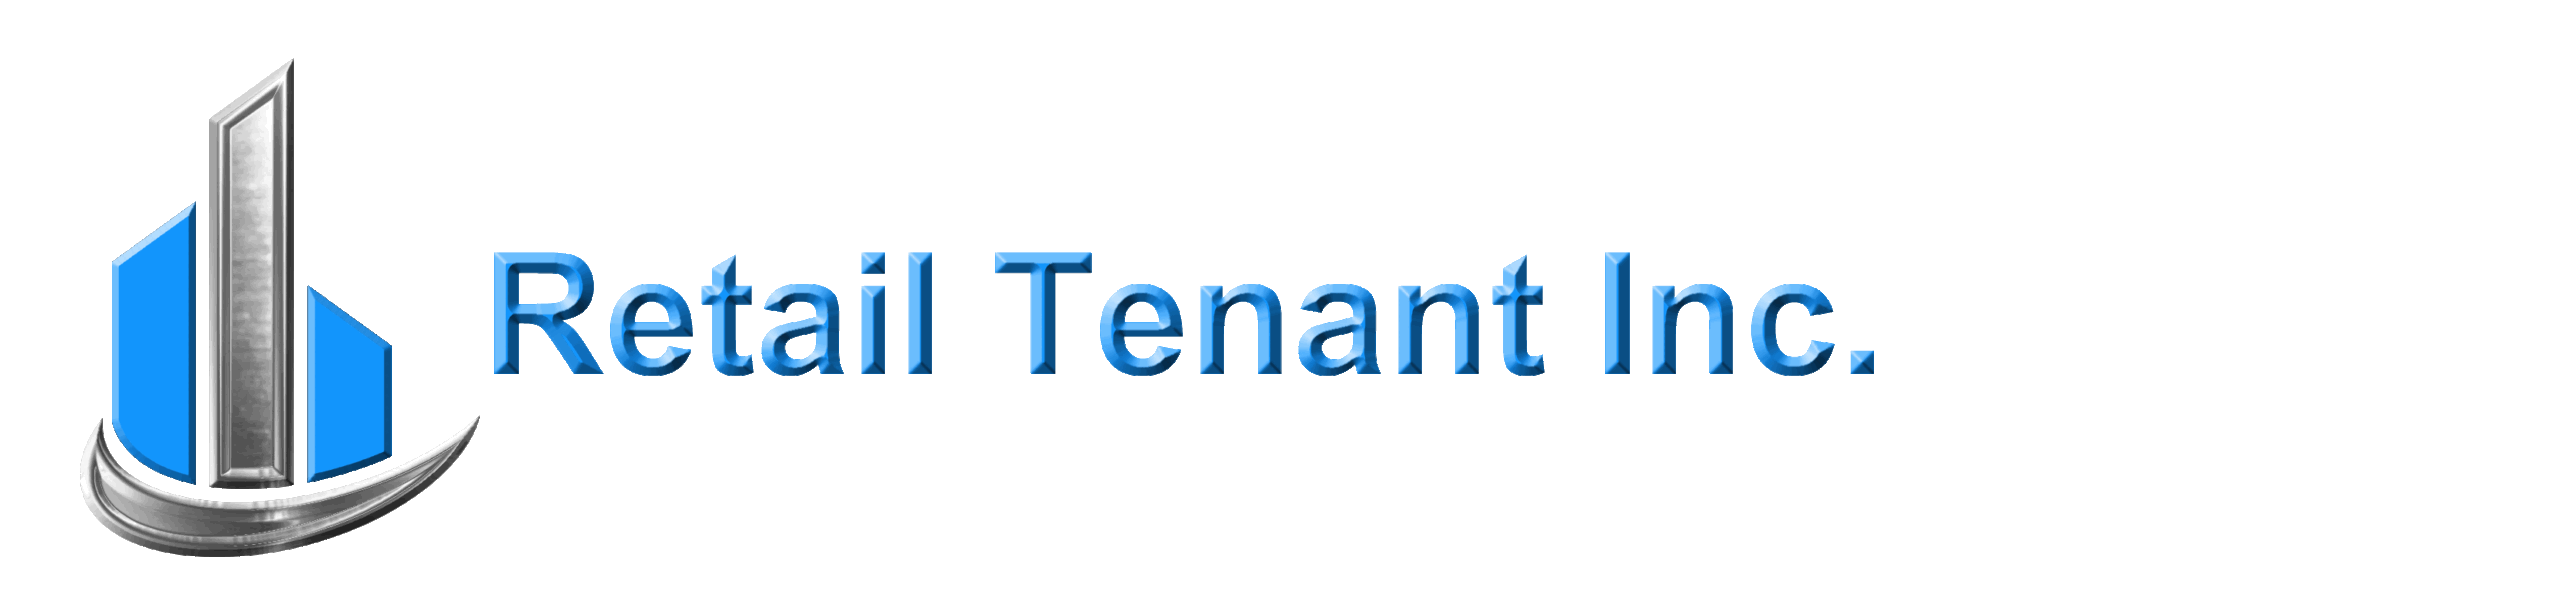 Retail Tenant Directory Online